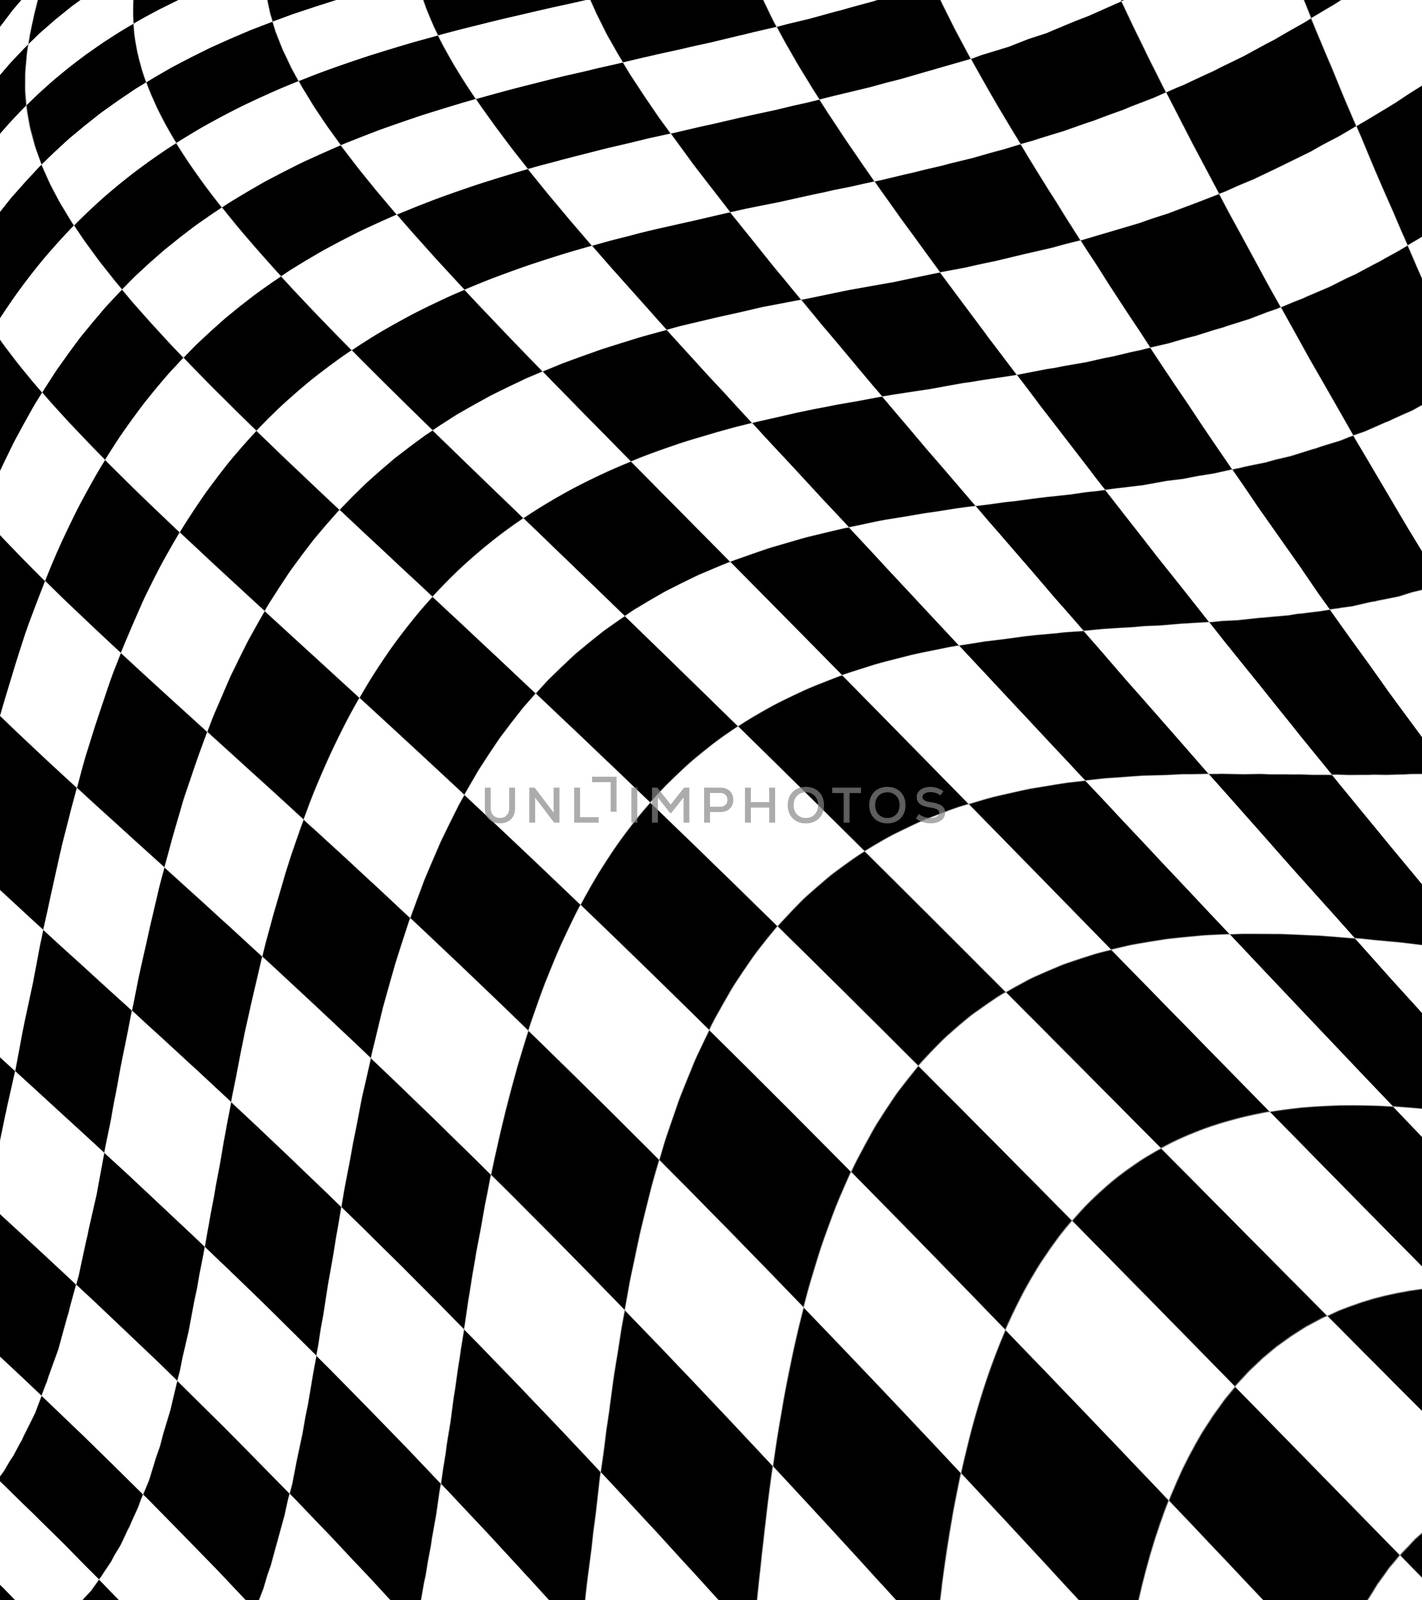 Black-white  checkered plane   made in 3d software